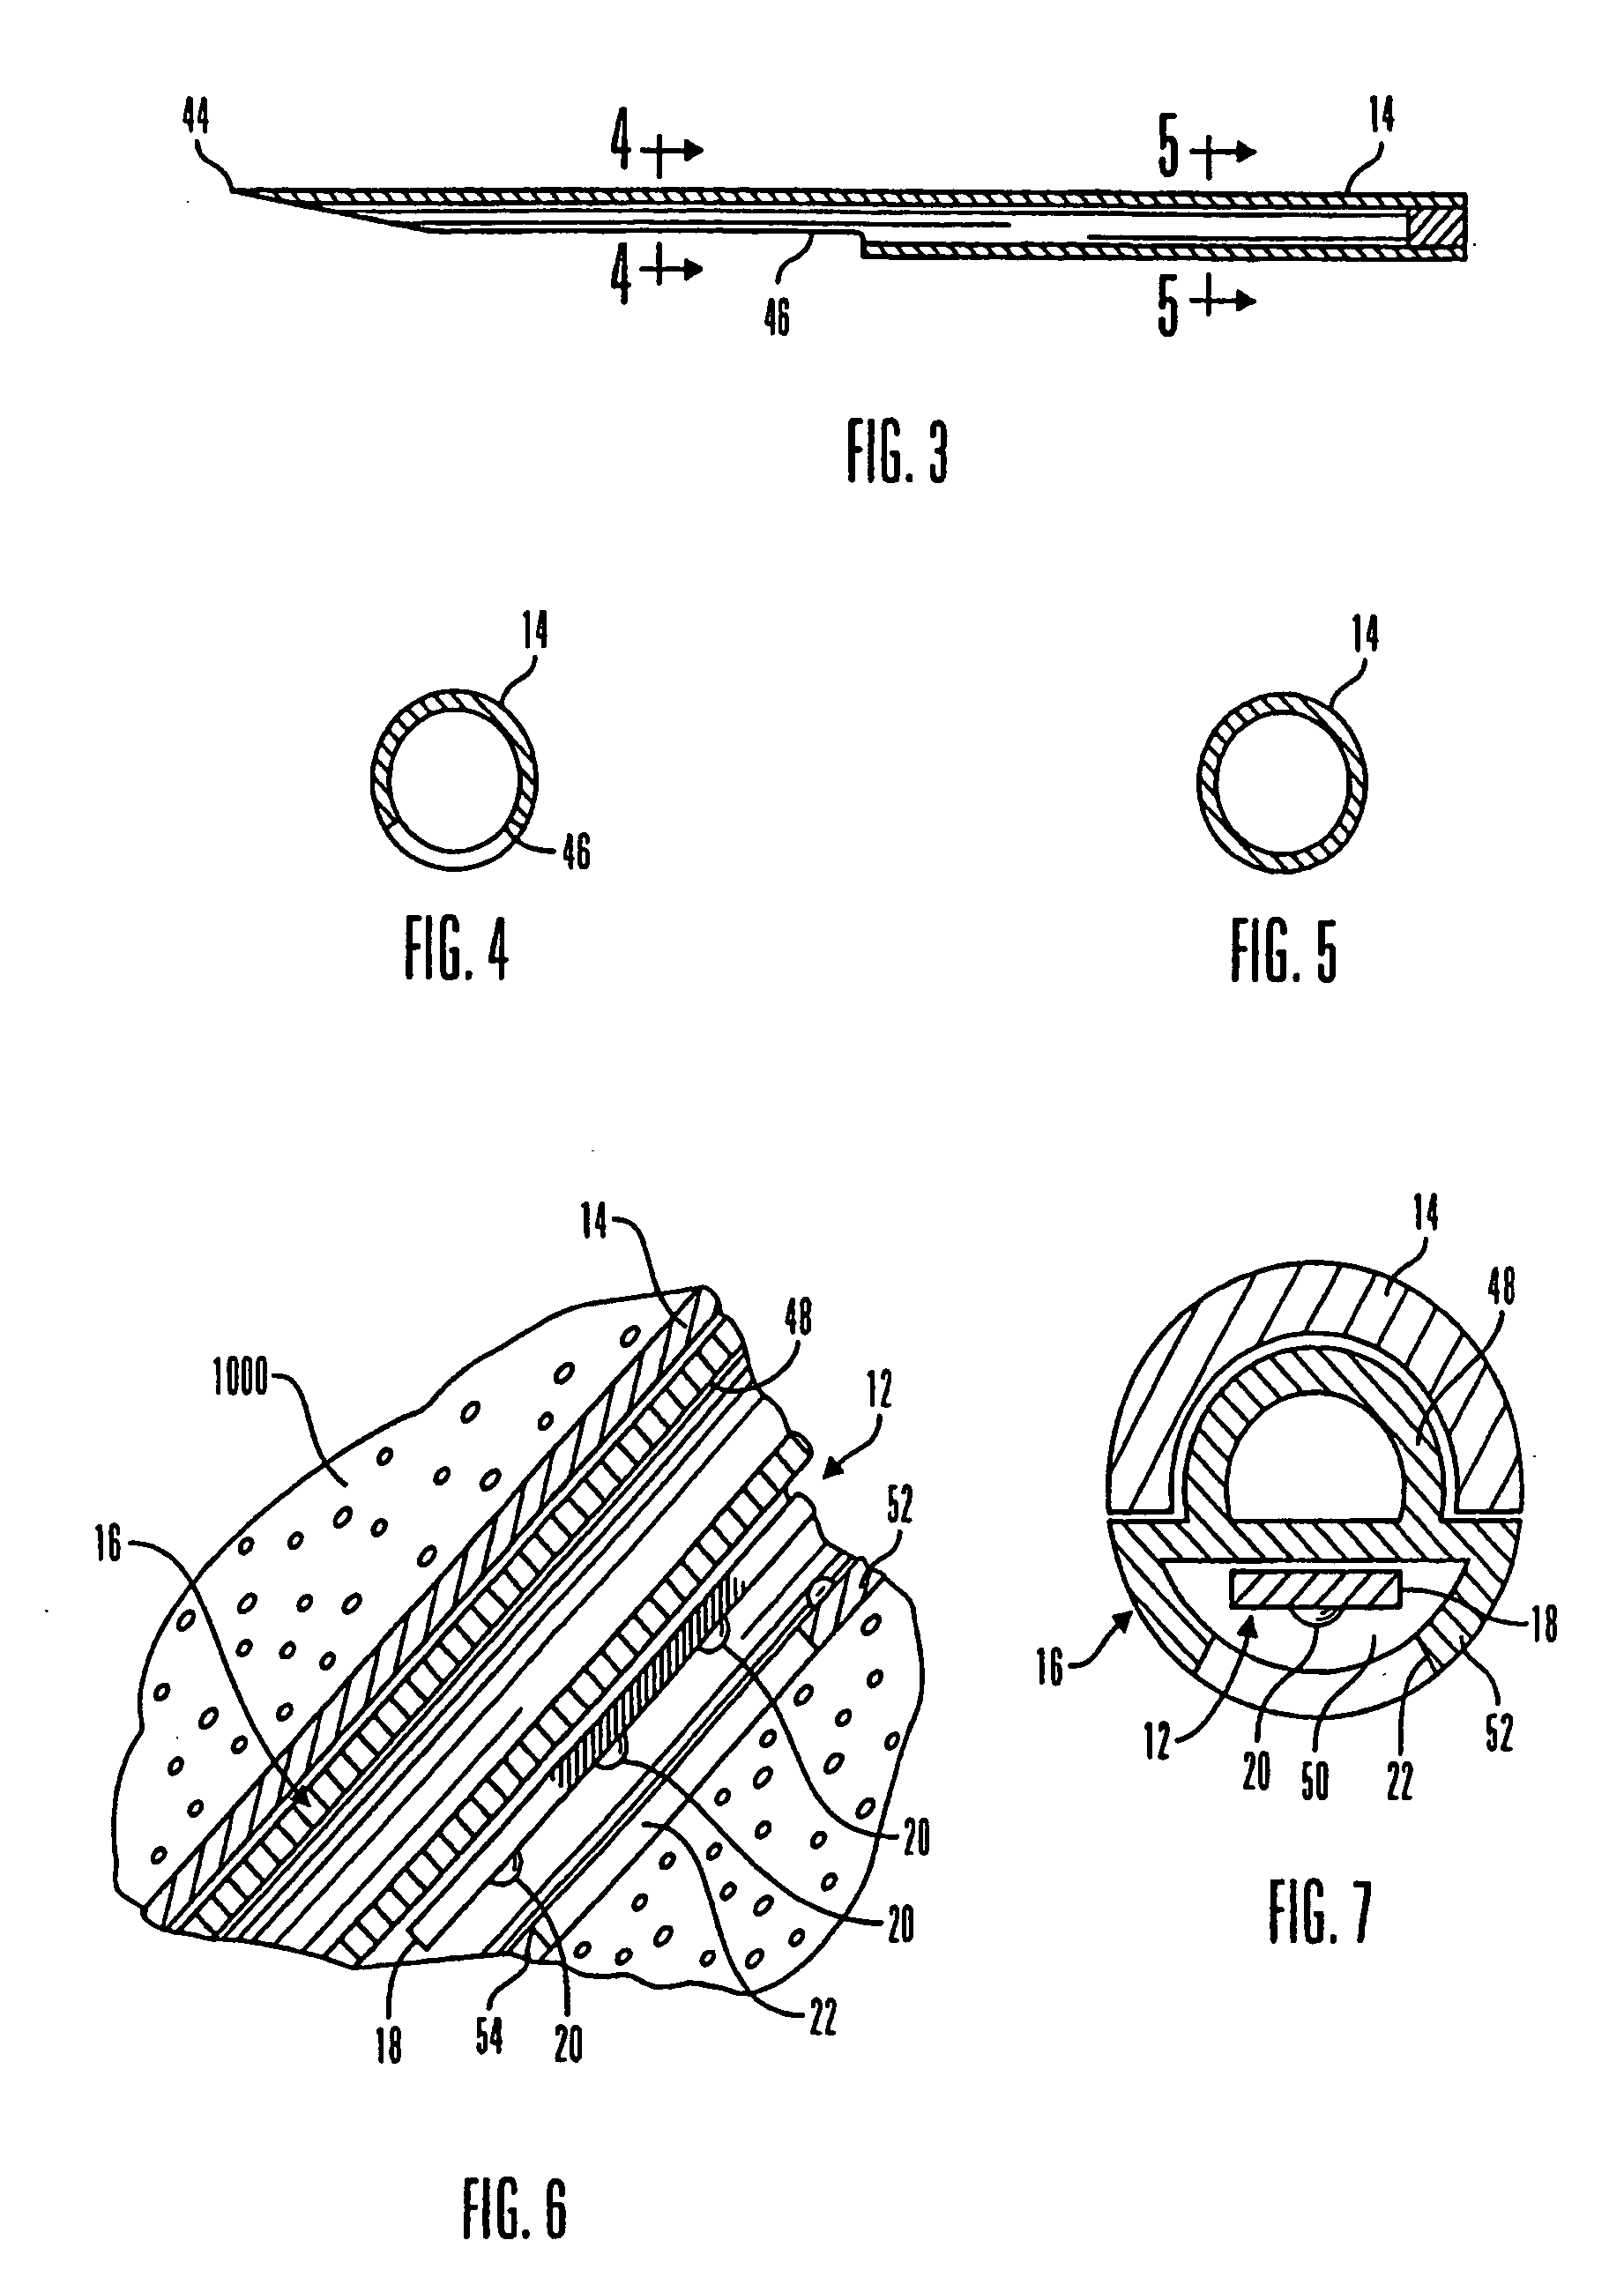 Telemetered characteristic monitor system and method of using the same